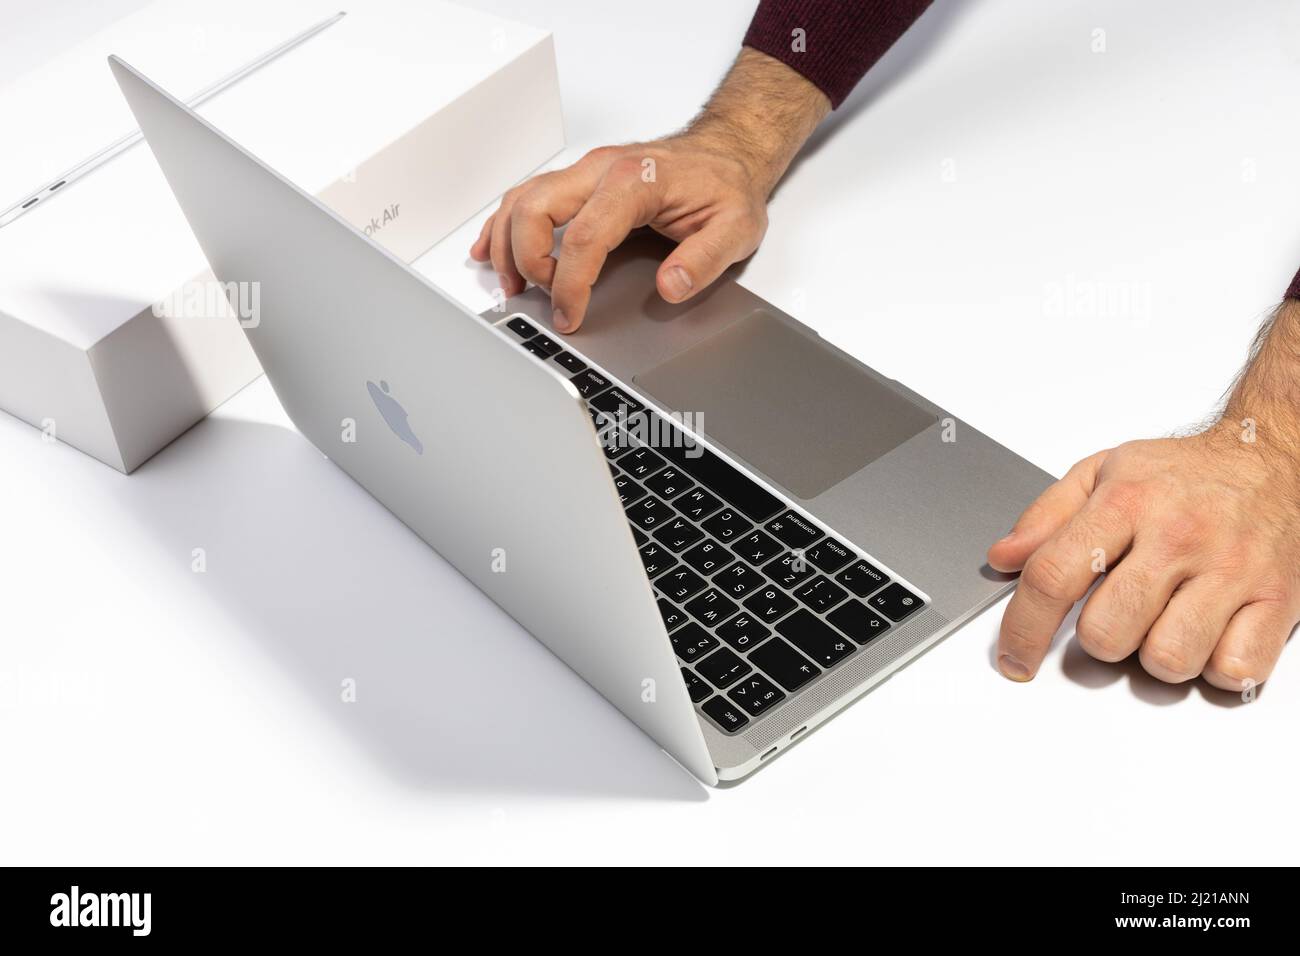 Saratov, Russia - February 26, 2022: turn on Macbook Air 13 inch with M1 processor. Unpacking new Apple laptop closeup, white background. Advertising Stock Photo